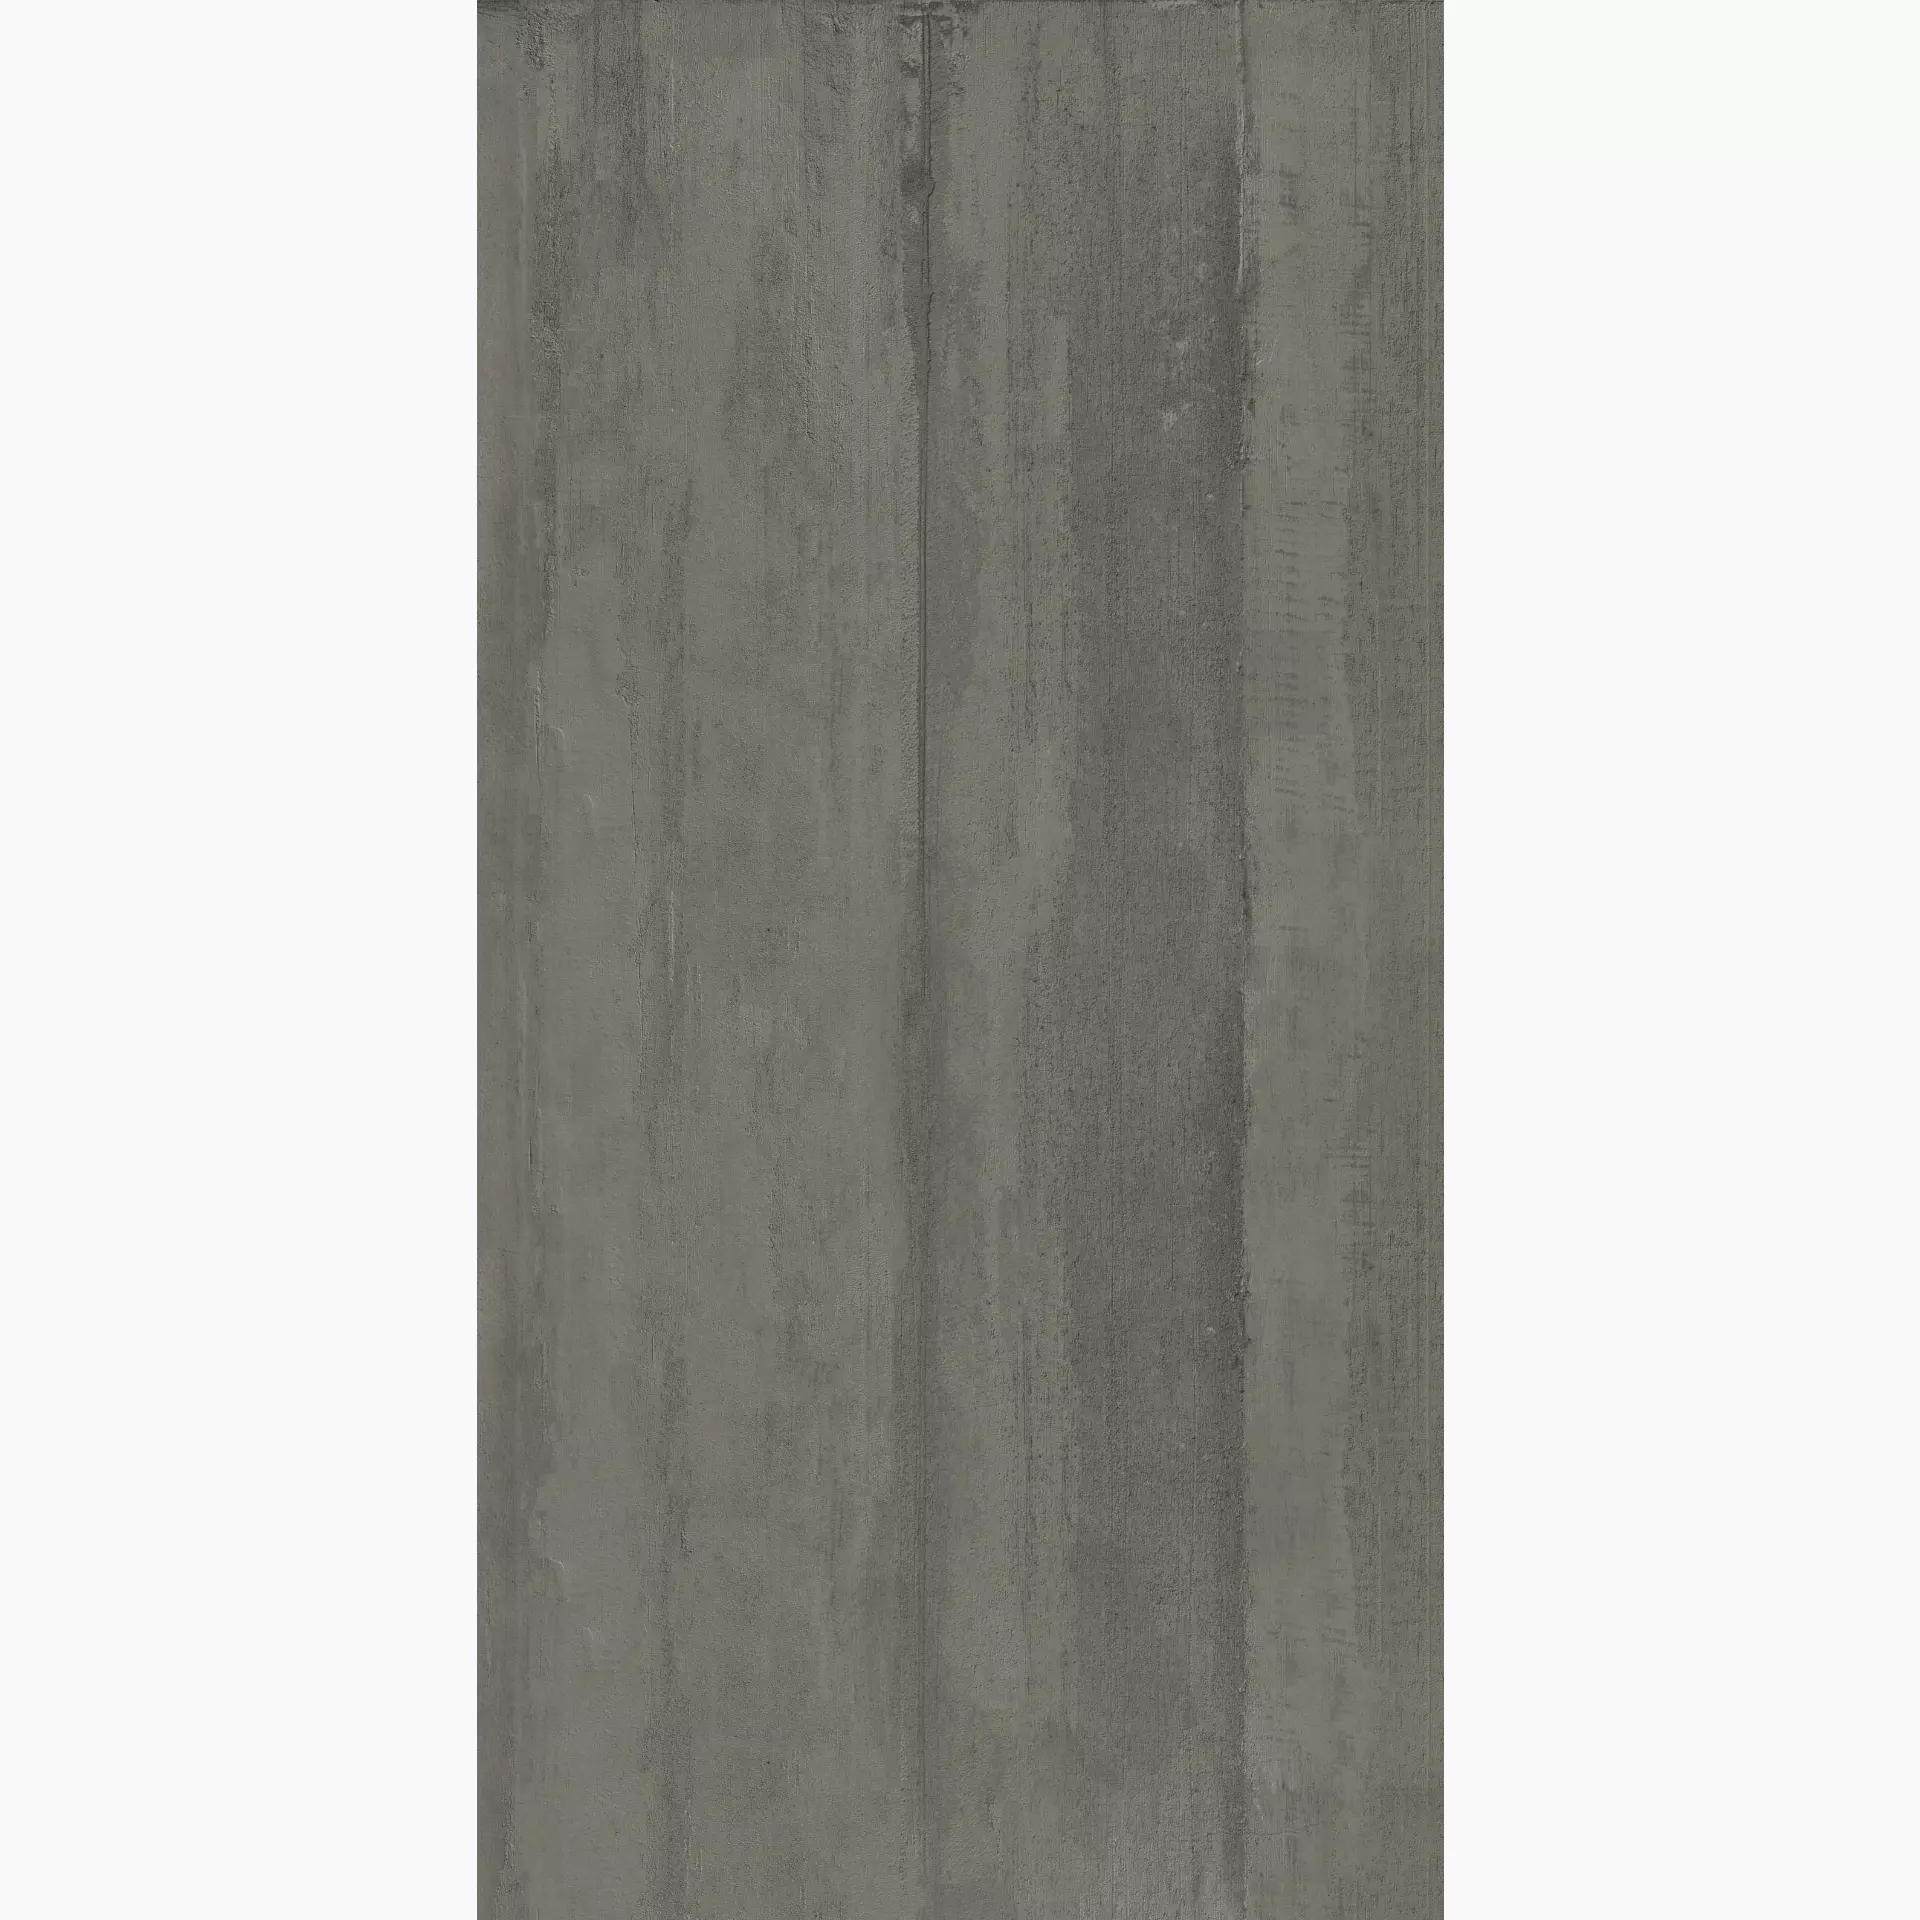 ABK Out.20 Lab325 Taupe Outdoor PF60002704 60x120cm rectified 20mm